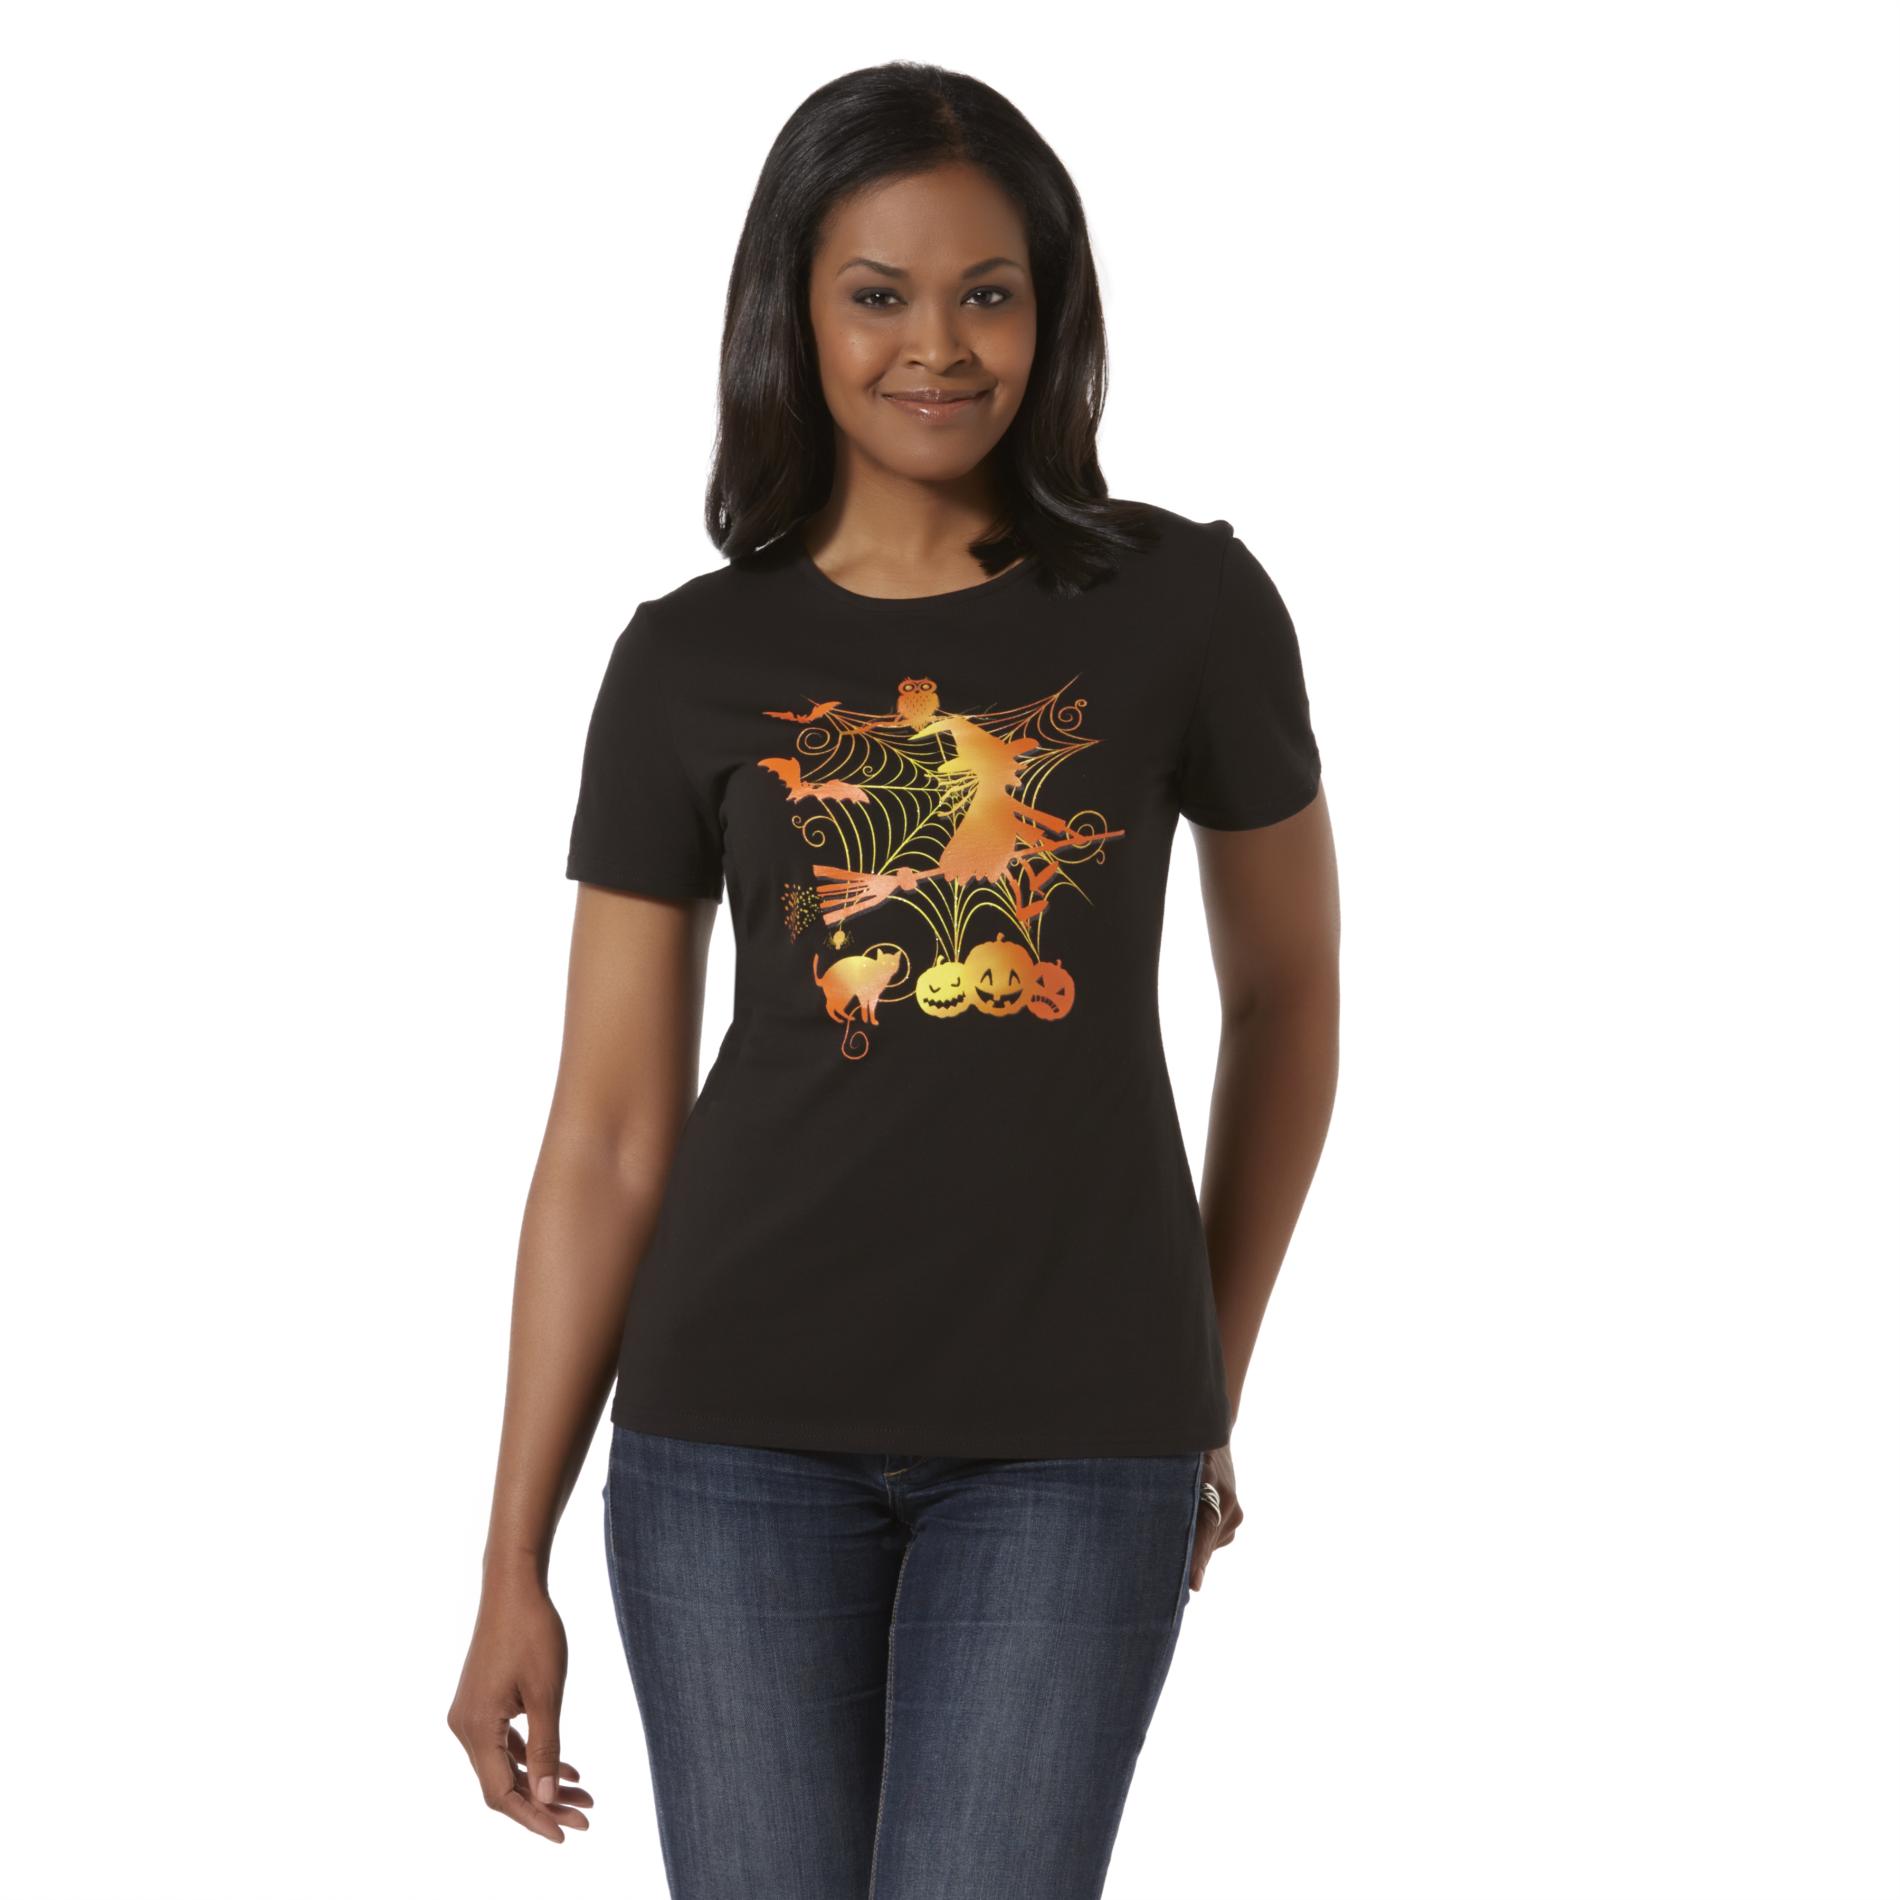 Women’s Halloween Tees 50% Off | Prices From $4.99!